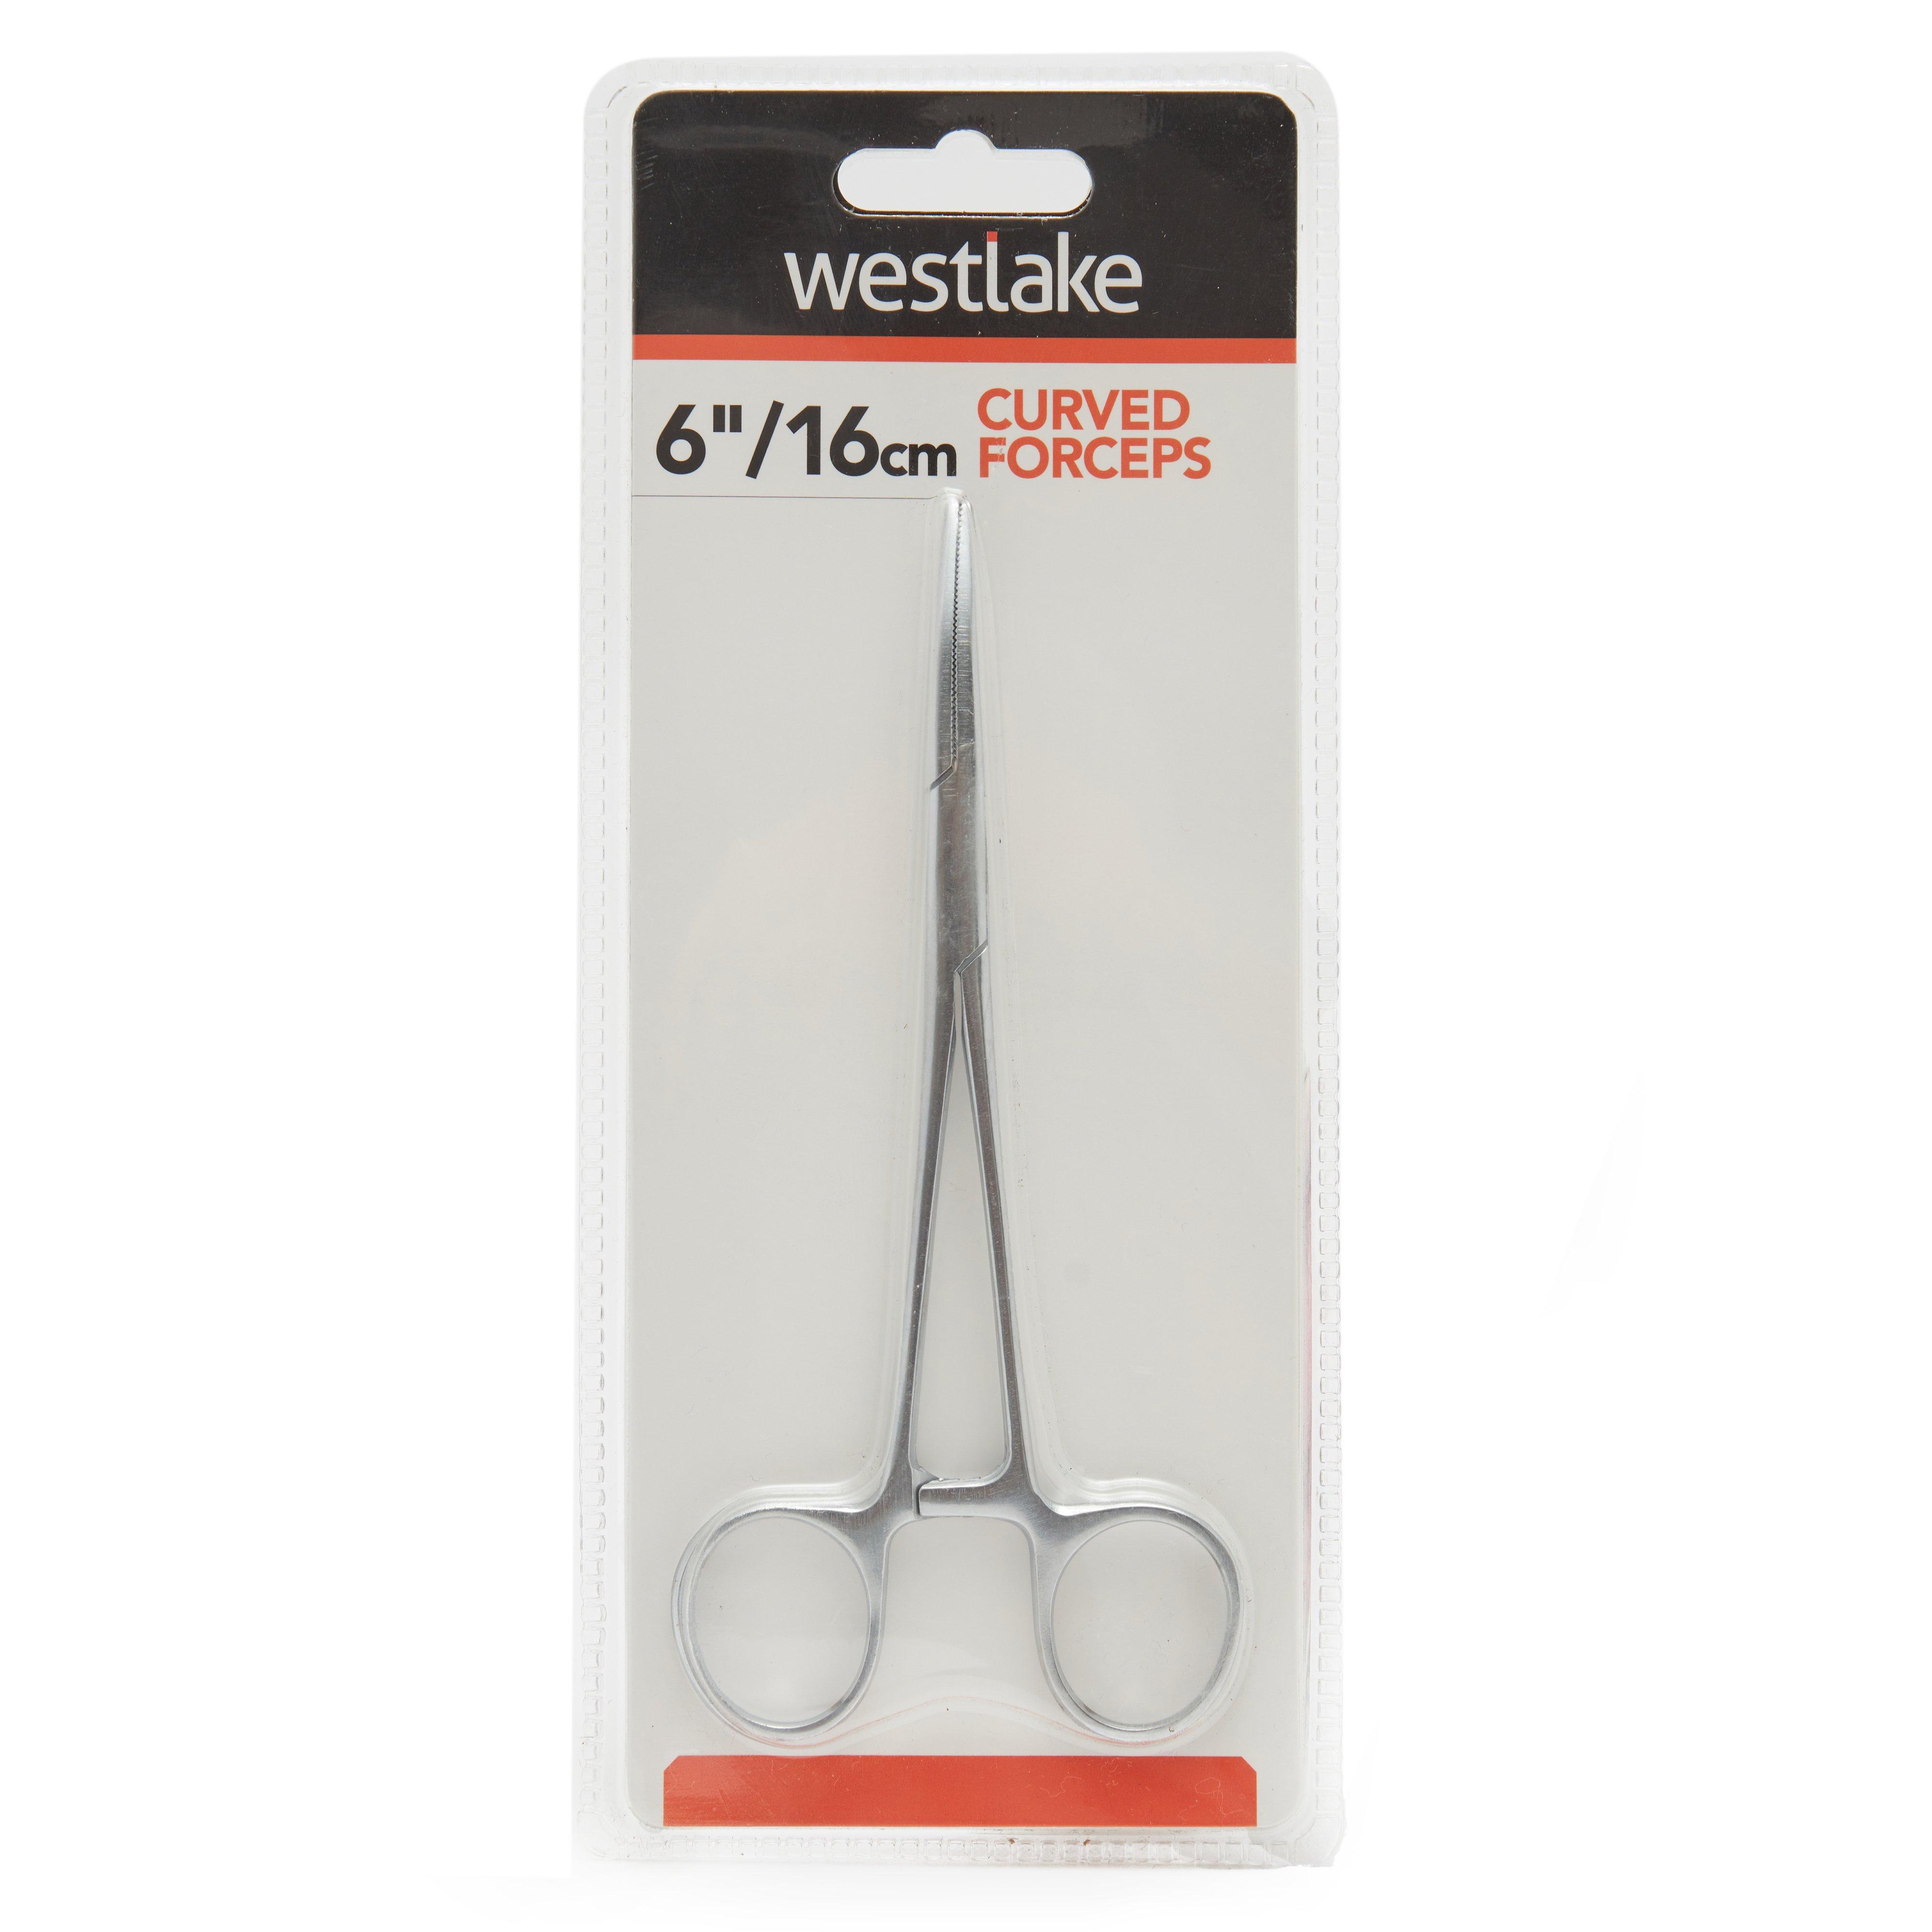 Westlake Curved Forceps 16Cm Review